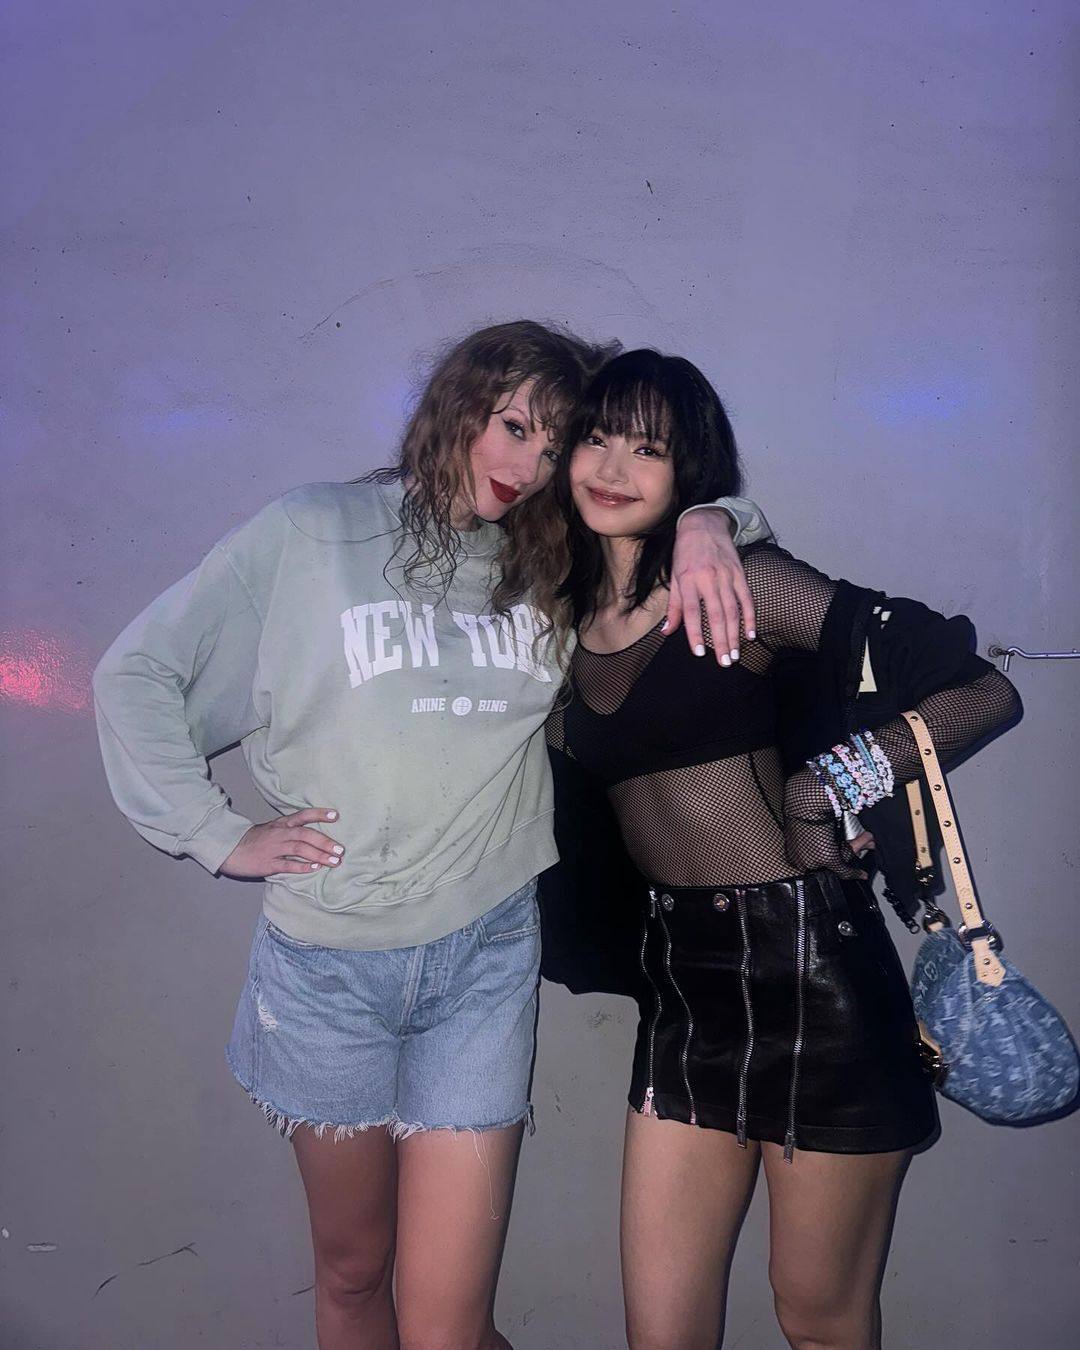 Besides Blackpink’s Lisa, which famous names were at Taylor Swift’s Singapore concerts? Photo: @lalalalisa_m/Instagram